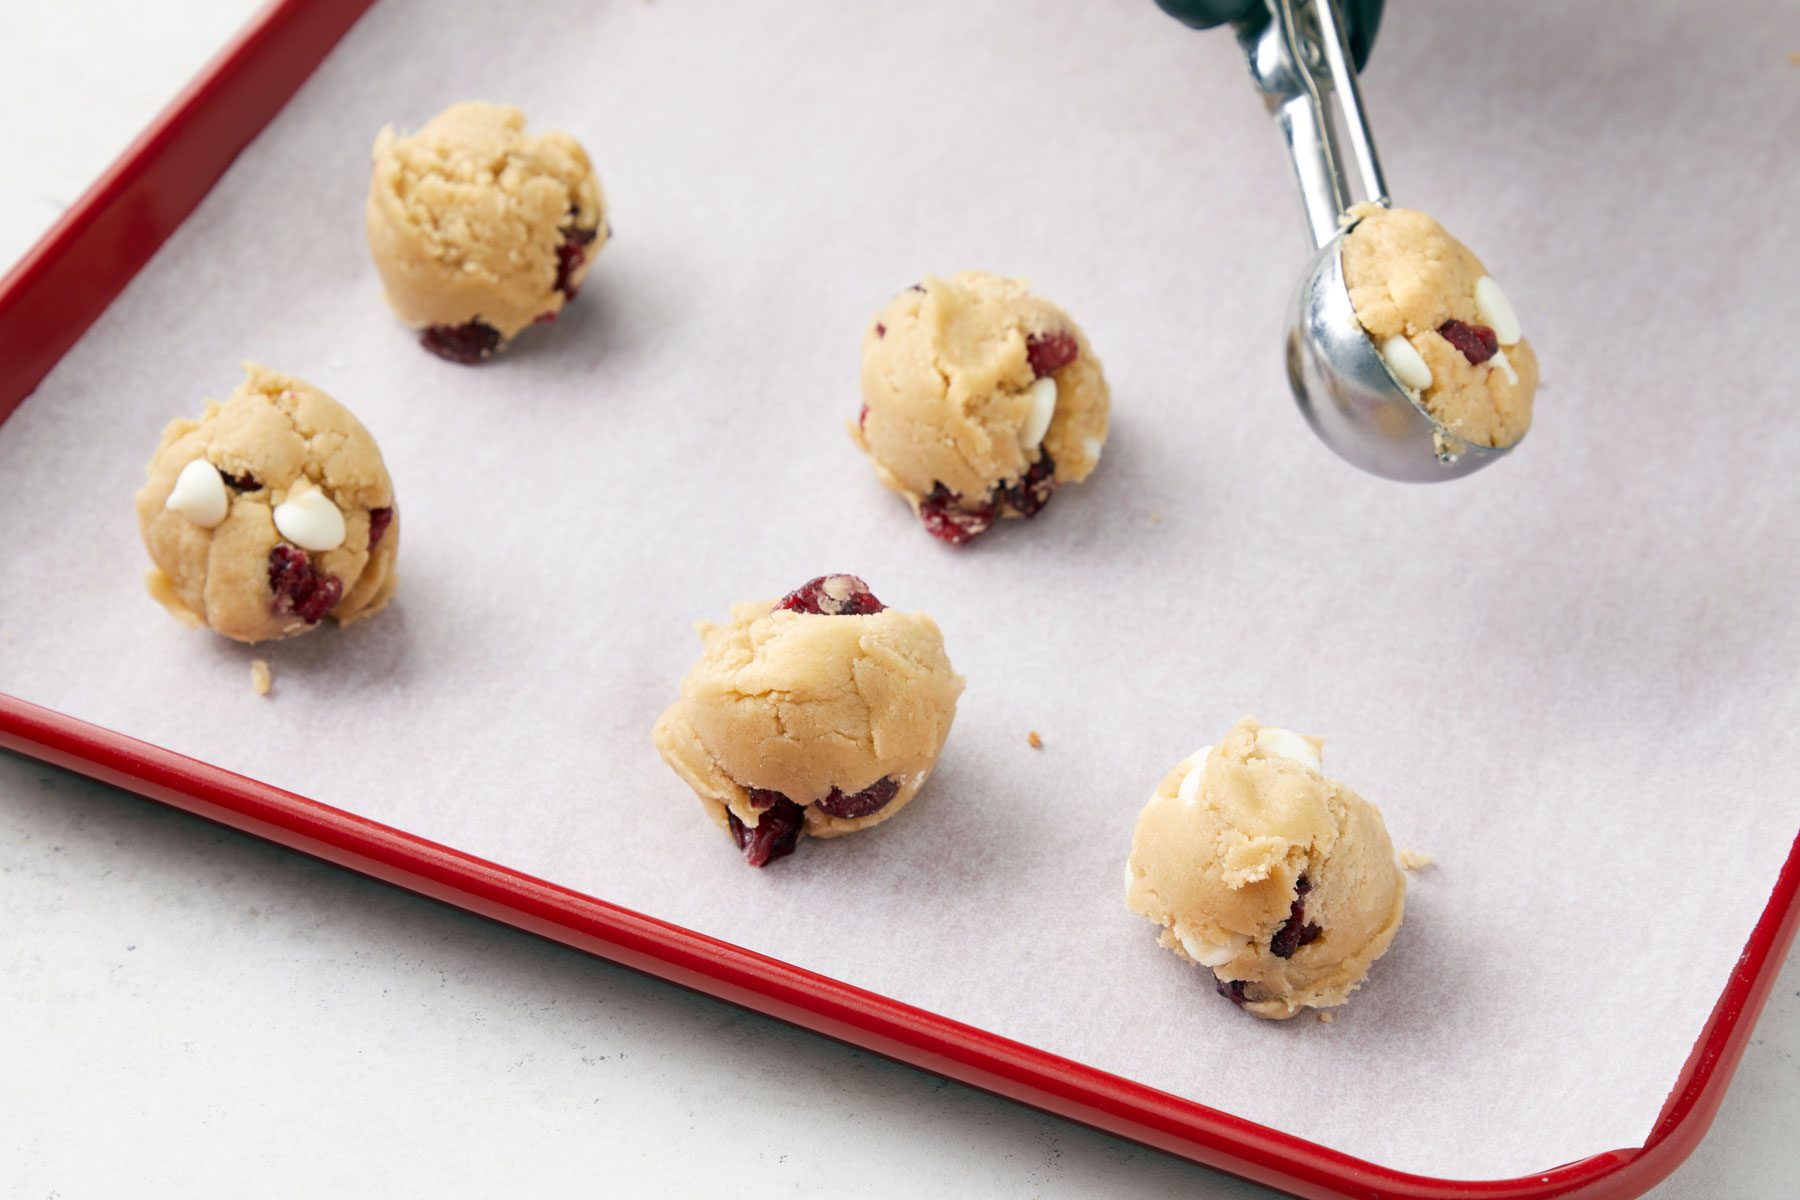 Scoops of cookie dough on baking sheets